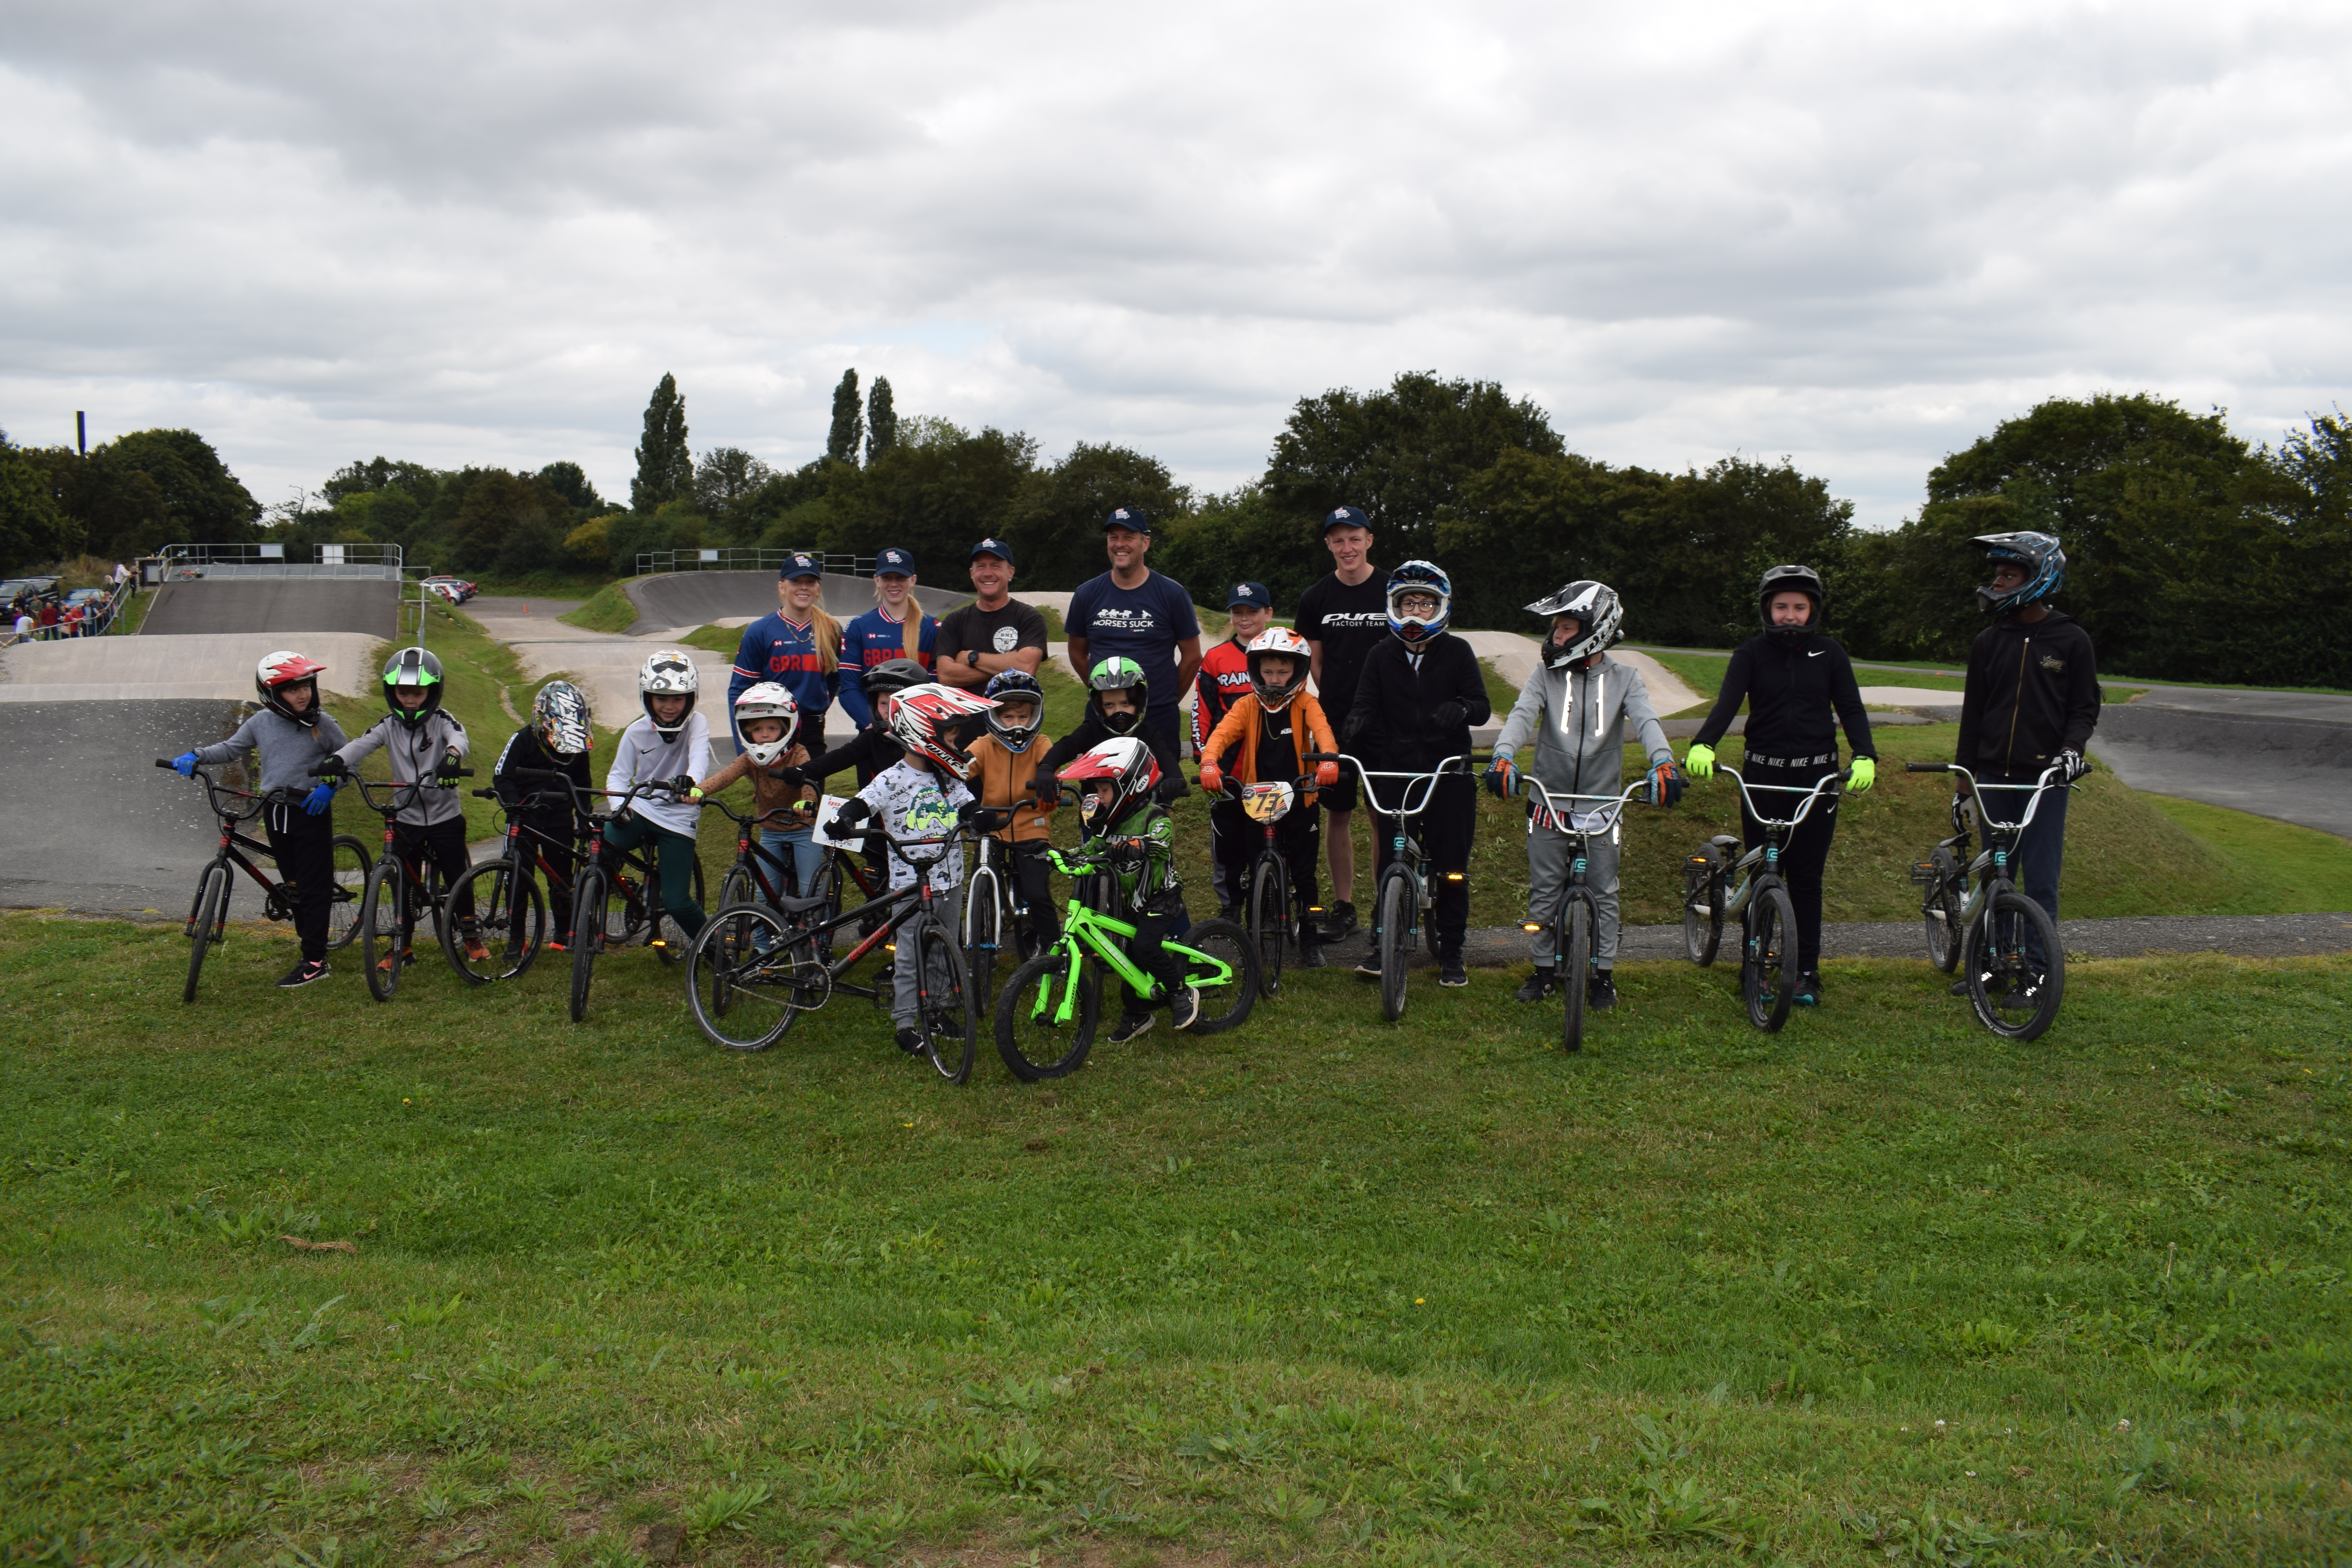 Group picture of BMX attendees